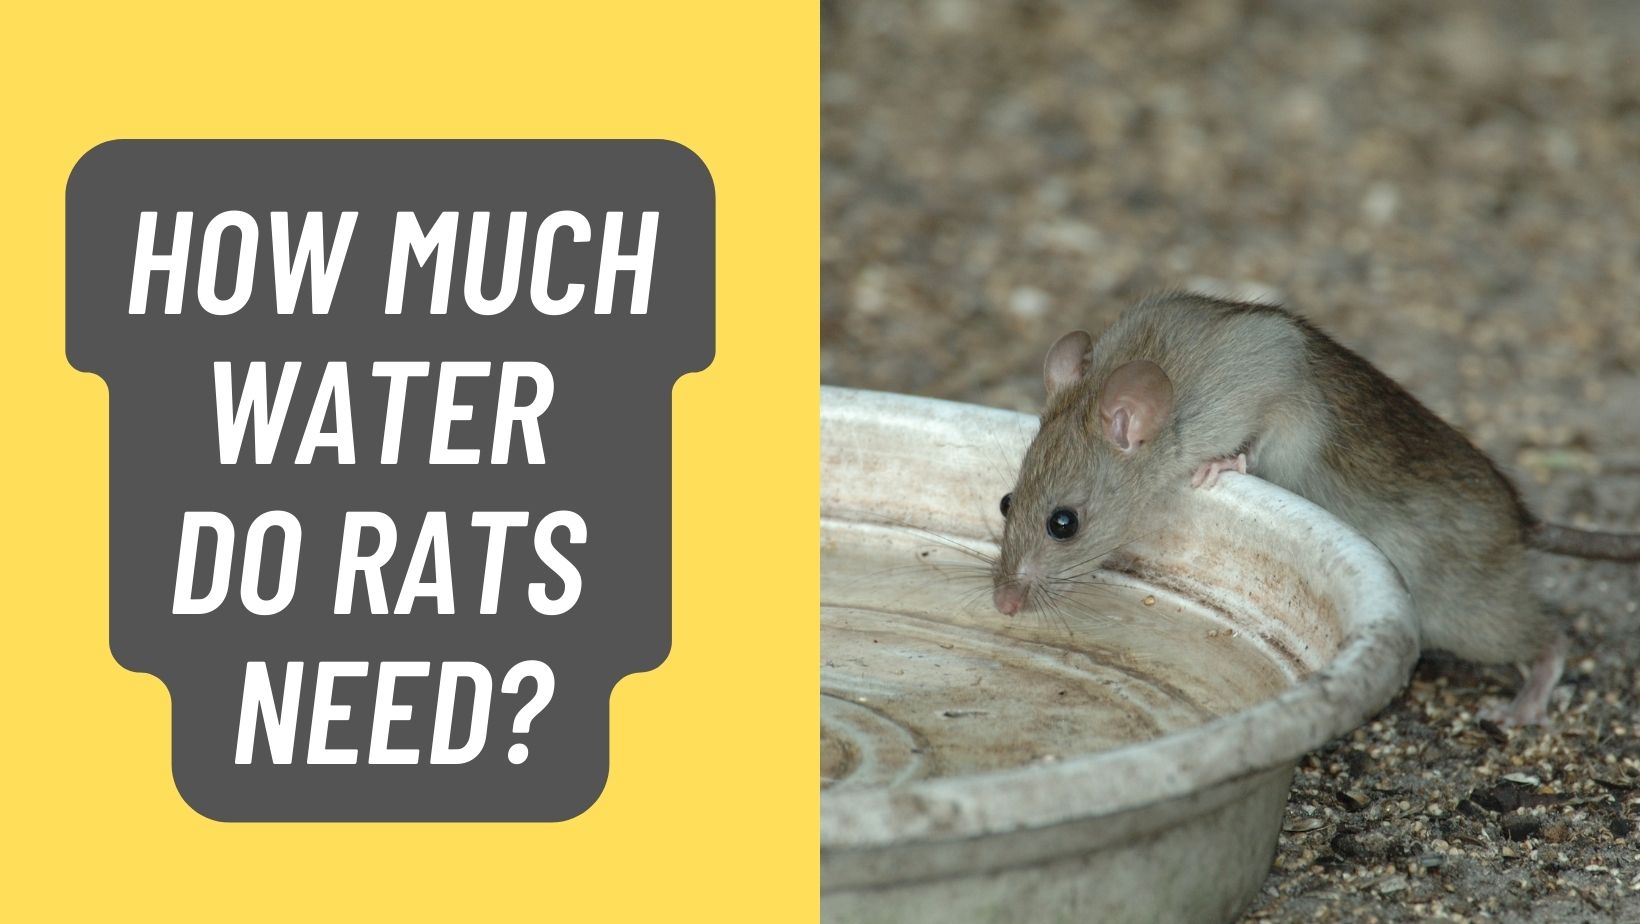 How Much Water do Rats Need?